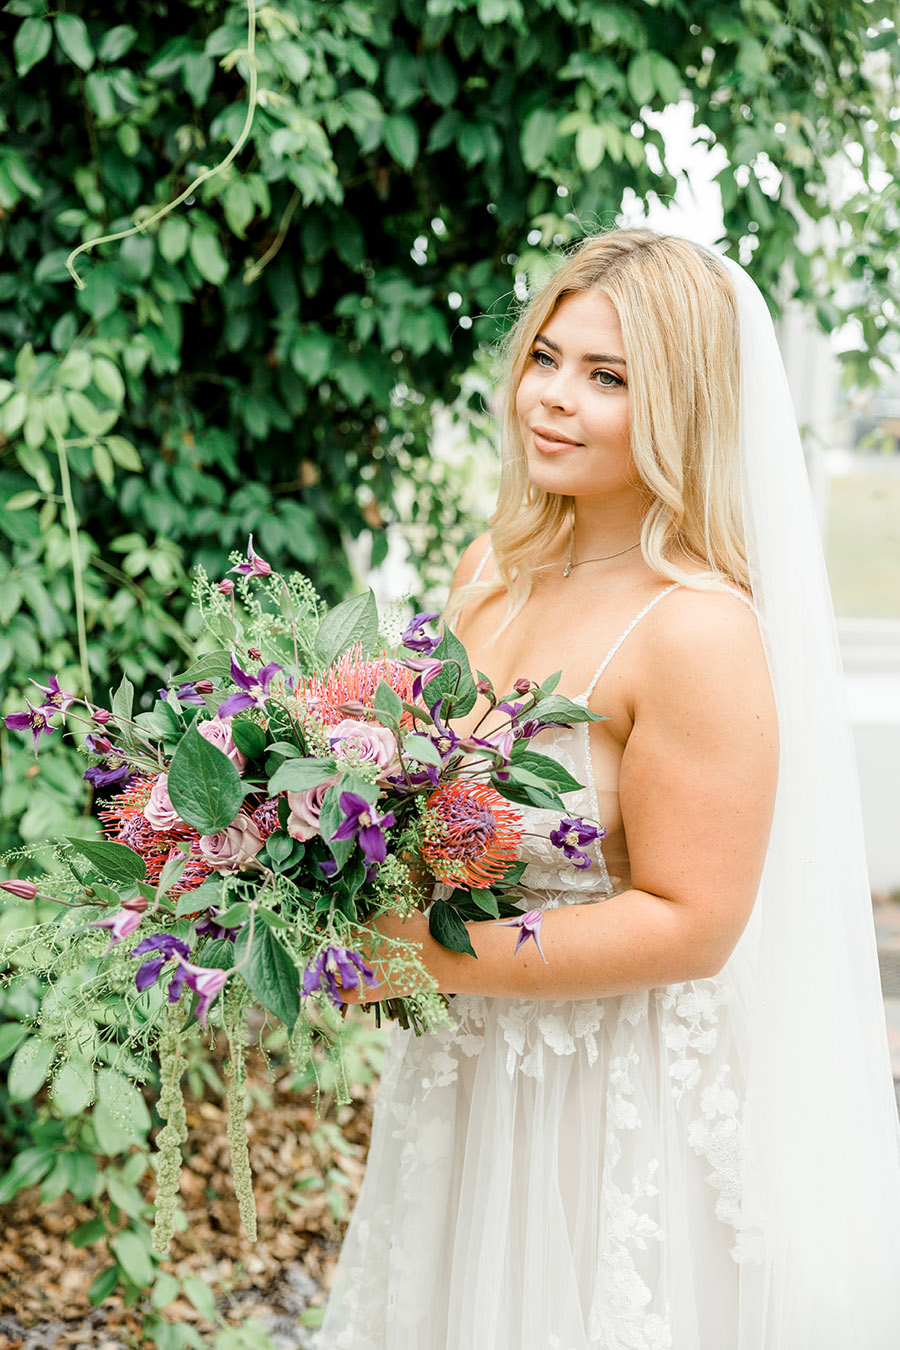 Modern intimate wedding styling inspiration from Slindon House, image credit Kelsie Scully (6)